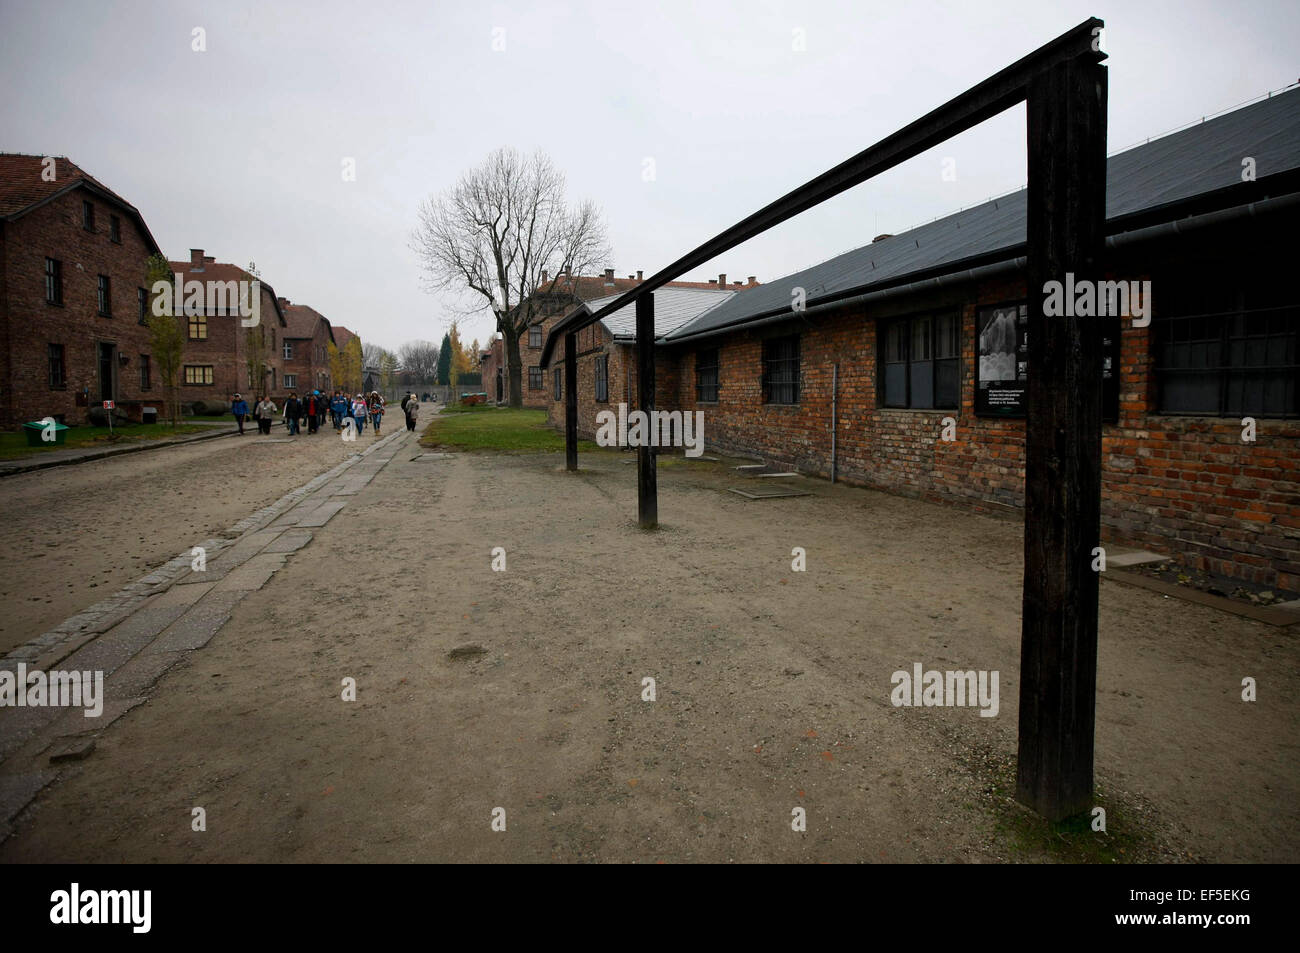 (150127) -- BRUSSELS, Jan. 27, 2015 (Xinhua) -- Photo taken on Nov. 9, 2012 shows the gallows once used during the biggest public execution of prisoners on July 19, 1943 at the former Auschwitz concentration camp in Oswiecim, Poland. The celebrations of the 70th anniversary of Auschwitz concentration camp liberation began in the Polish southern town of Oswiecim on Tuesday morning. The concentration camp was founded in 1940 by the Germans mostly for the aim of imprisoning Polish captives. Since 1942 it became Europe's one of the biggest places of Jewish extermination, with more than 1.1 million Stock Photo